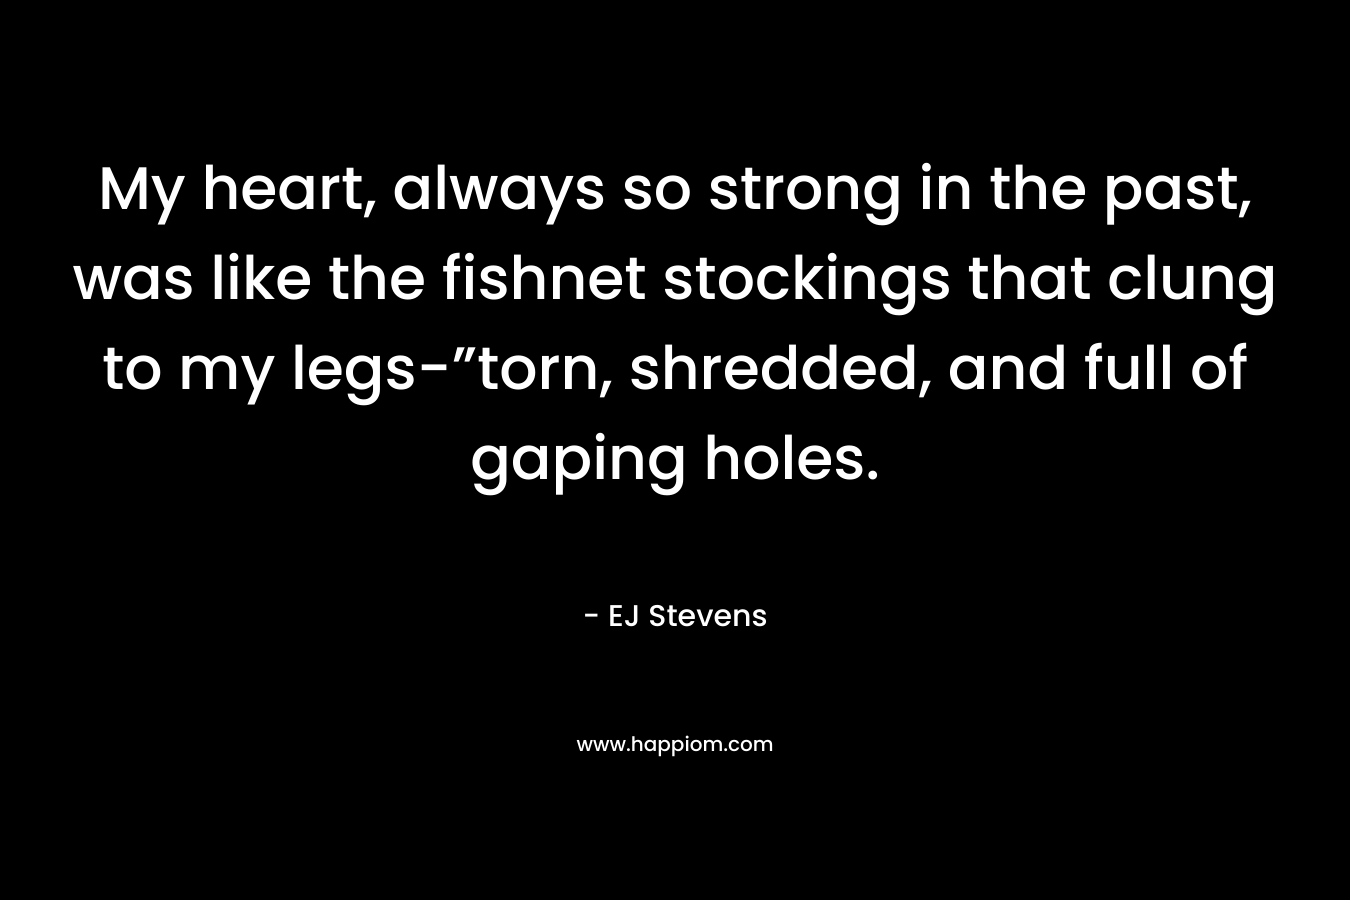 My heart, always so strong in the past, was like the fishnet stockings that clung to my legs-”torn, shredded, and full of gaping holes. – EJ Stevens